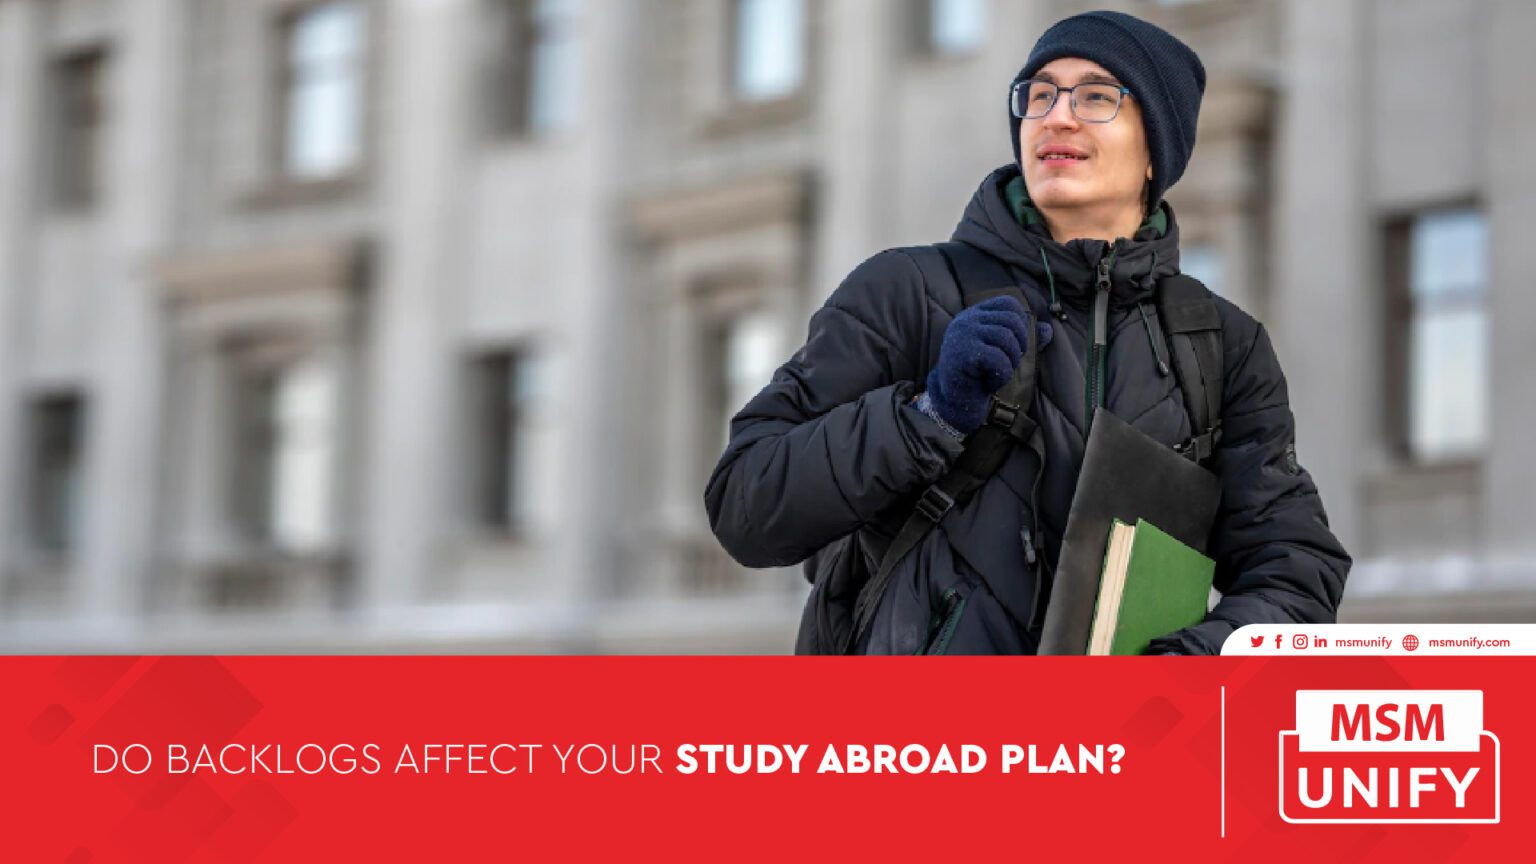 012323 MSM Unify Do Backlogs Affect Your Study Abroad Plan 01